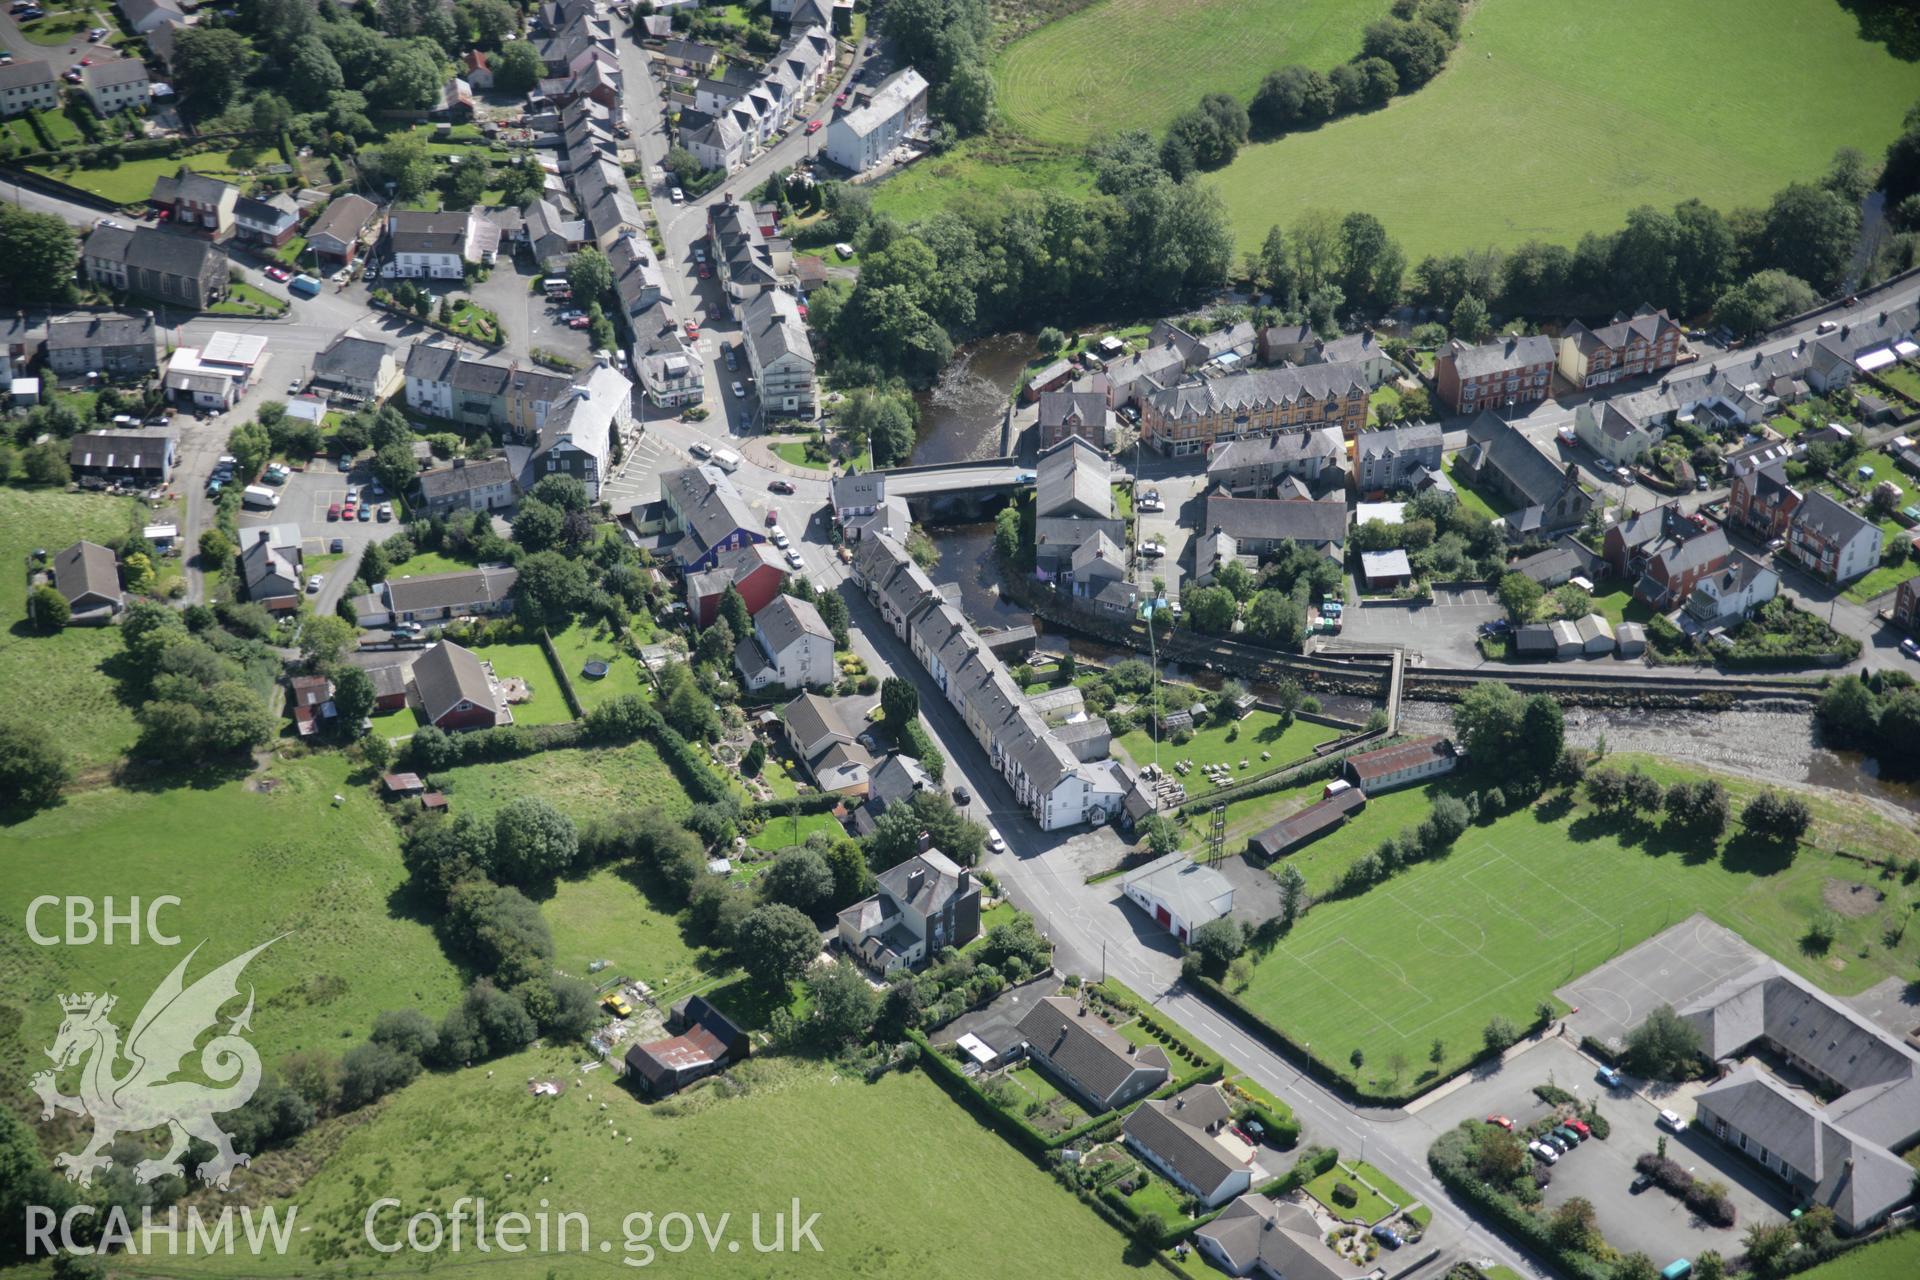 RCAHMW colour oblique aerial photograph of Llanwrtyd Wells town, viewed from the north-west. Taken on 02 September 2005 by Toby Driver